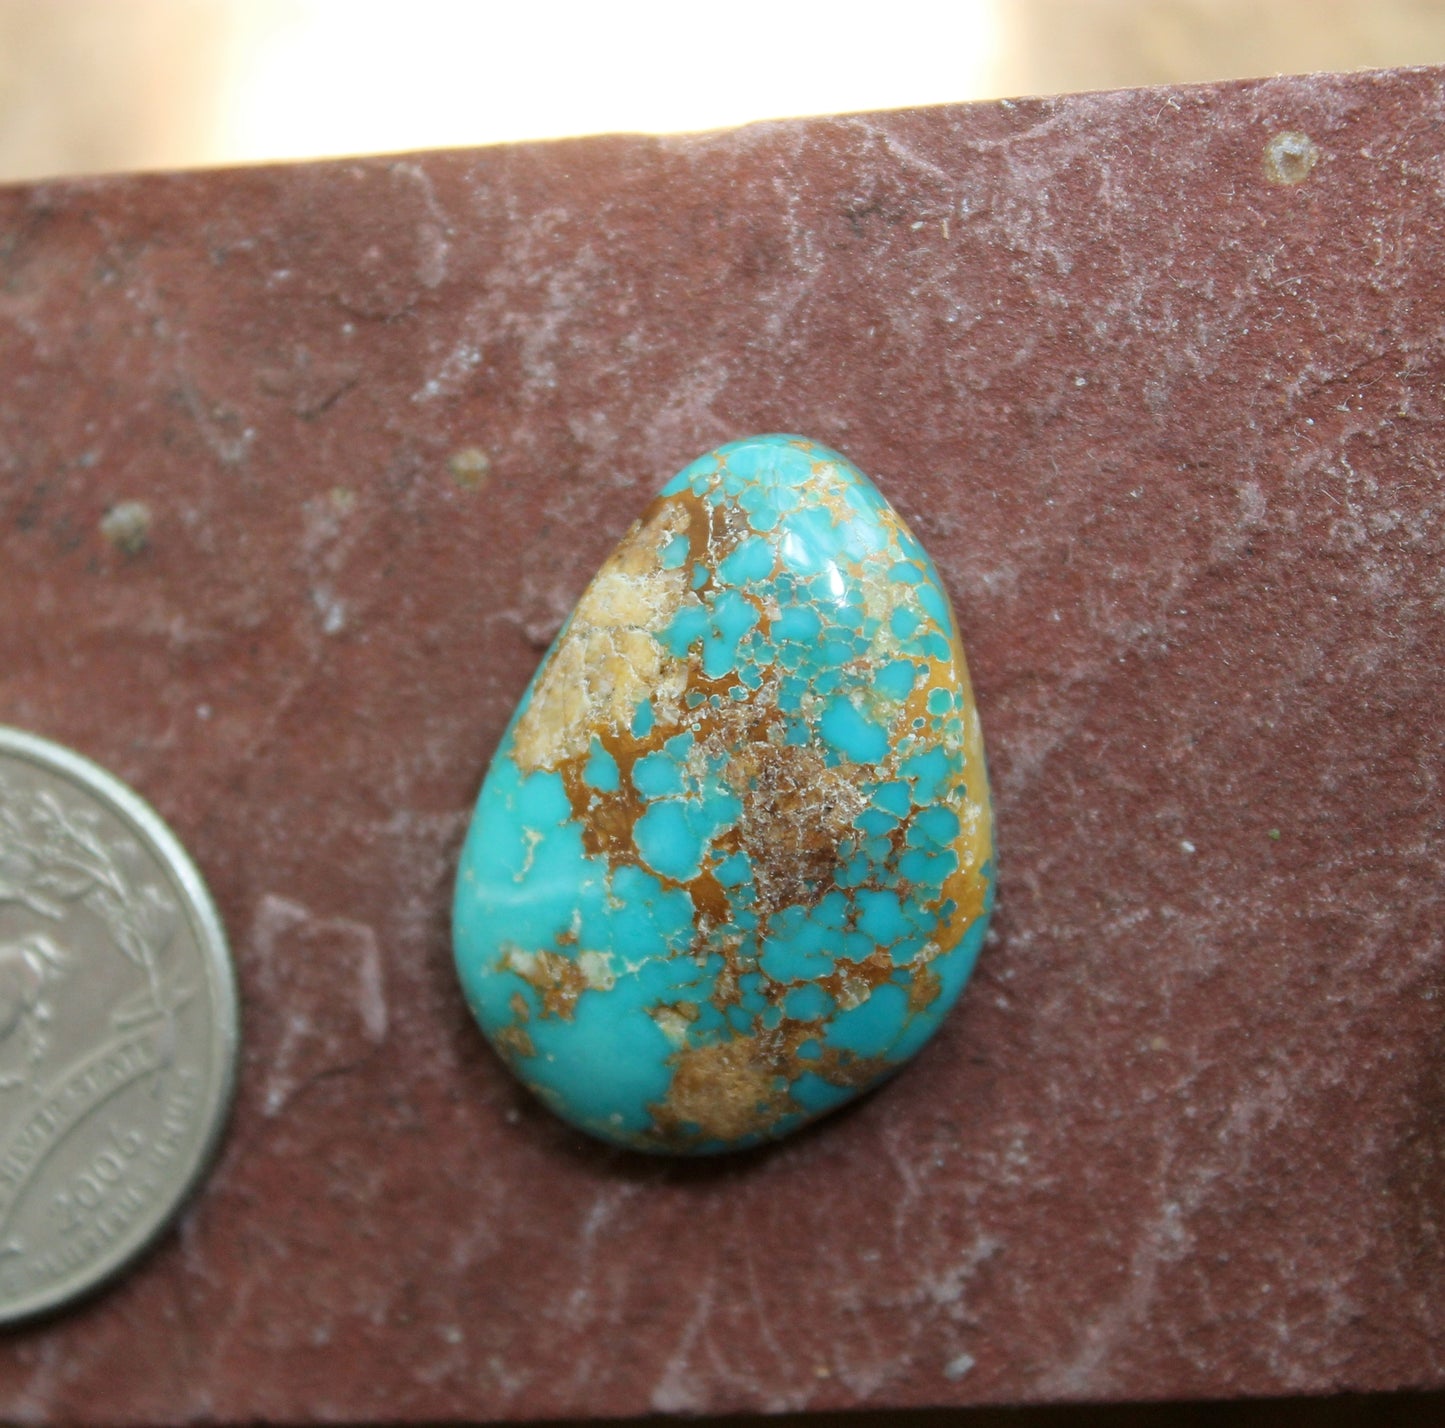 28 carat dark blue Stone Mountain Turquoise cabochon with red matrix